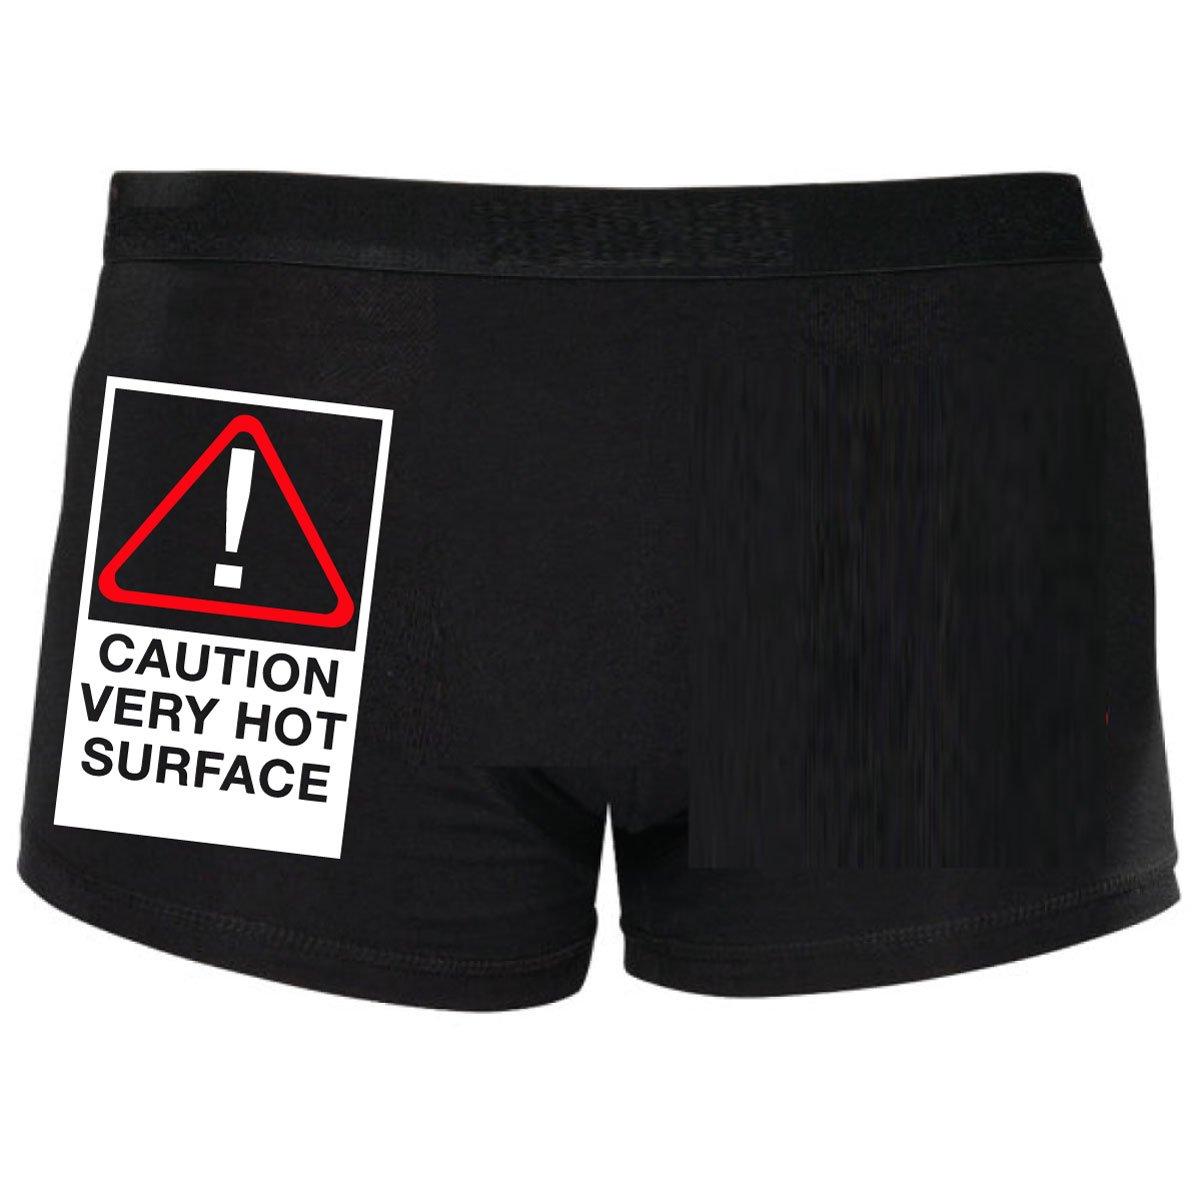 Funny Boxers Caution Very Hot Surface Shorty Boxers